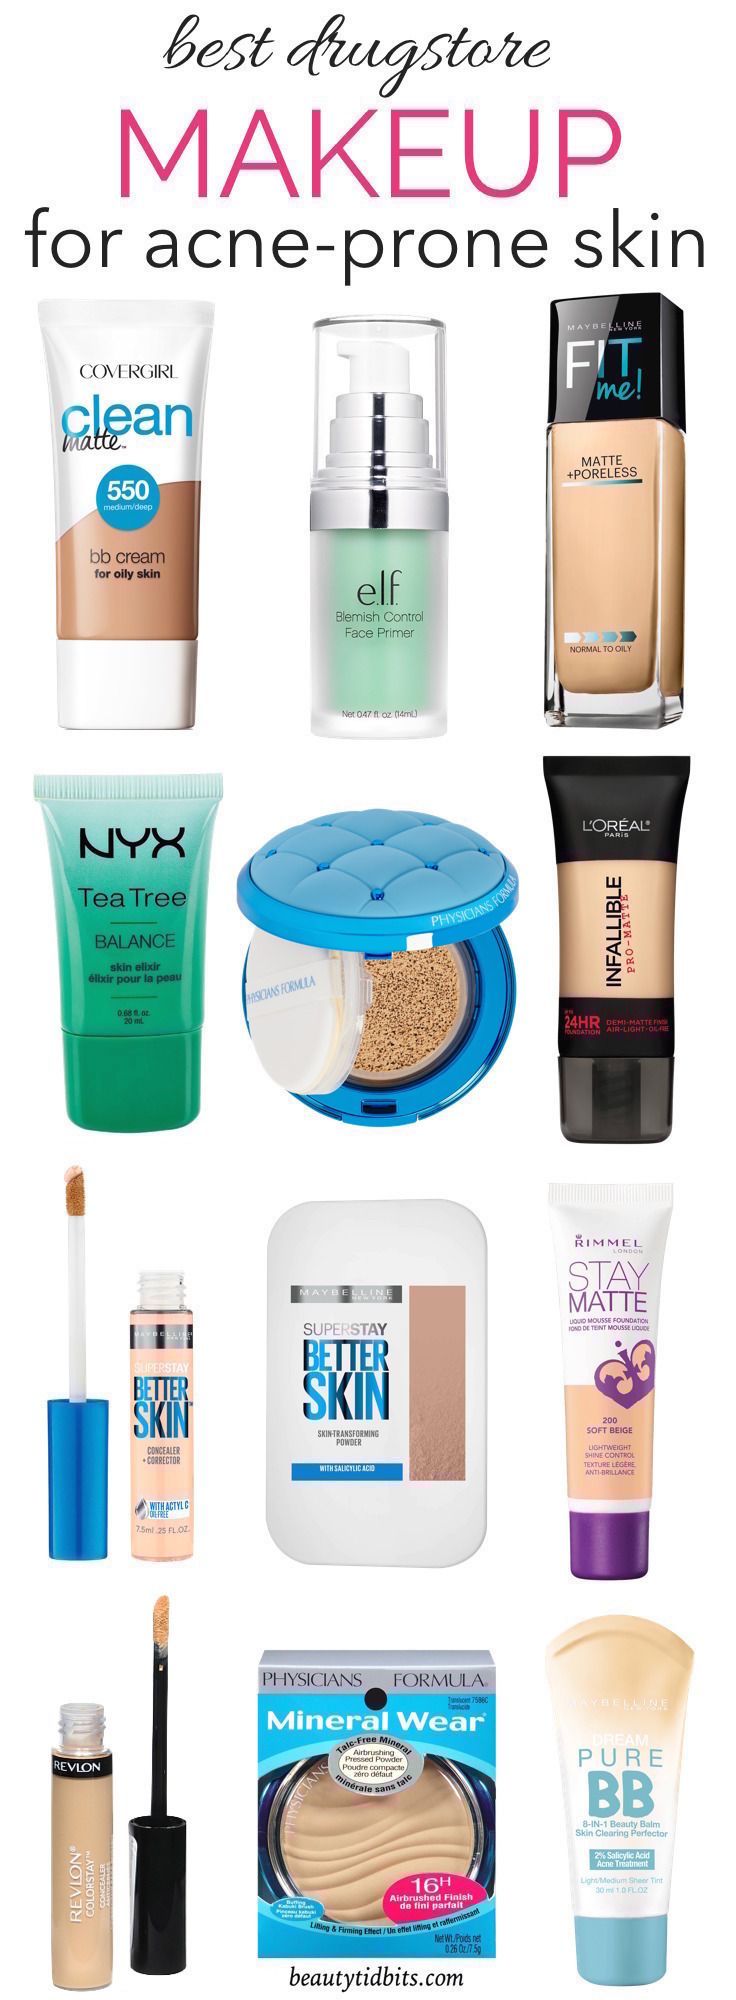 From foundations and BB creams to concealers, this is the ultimate guide to the be